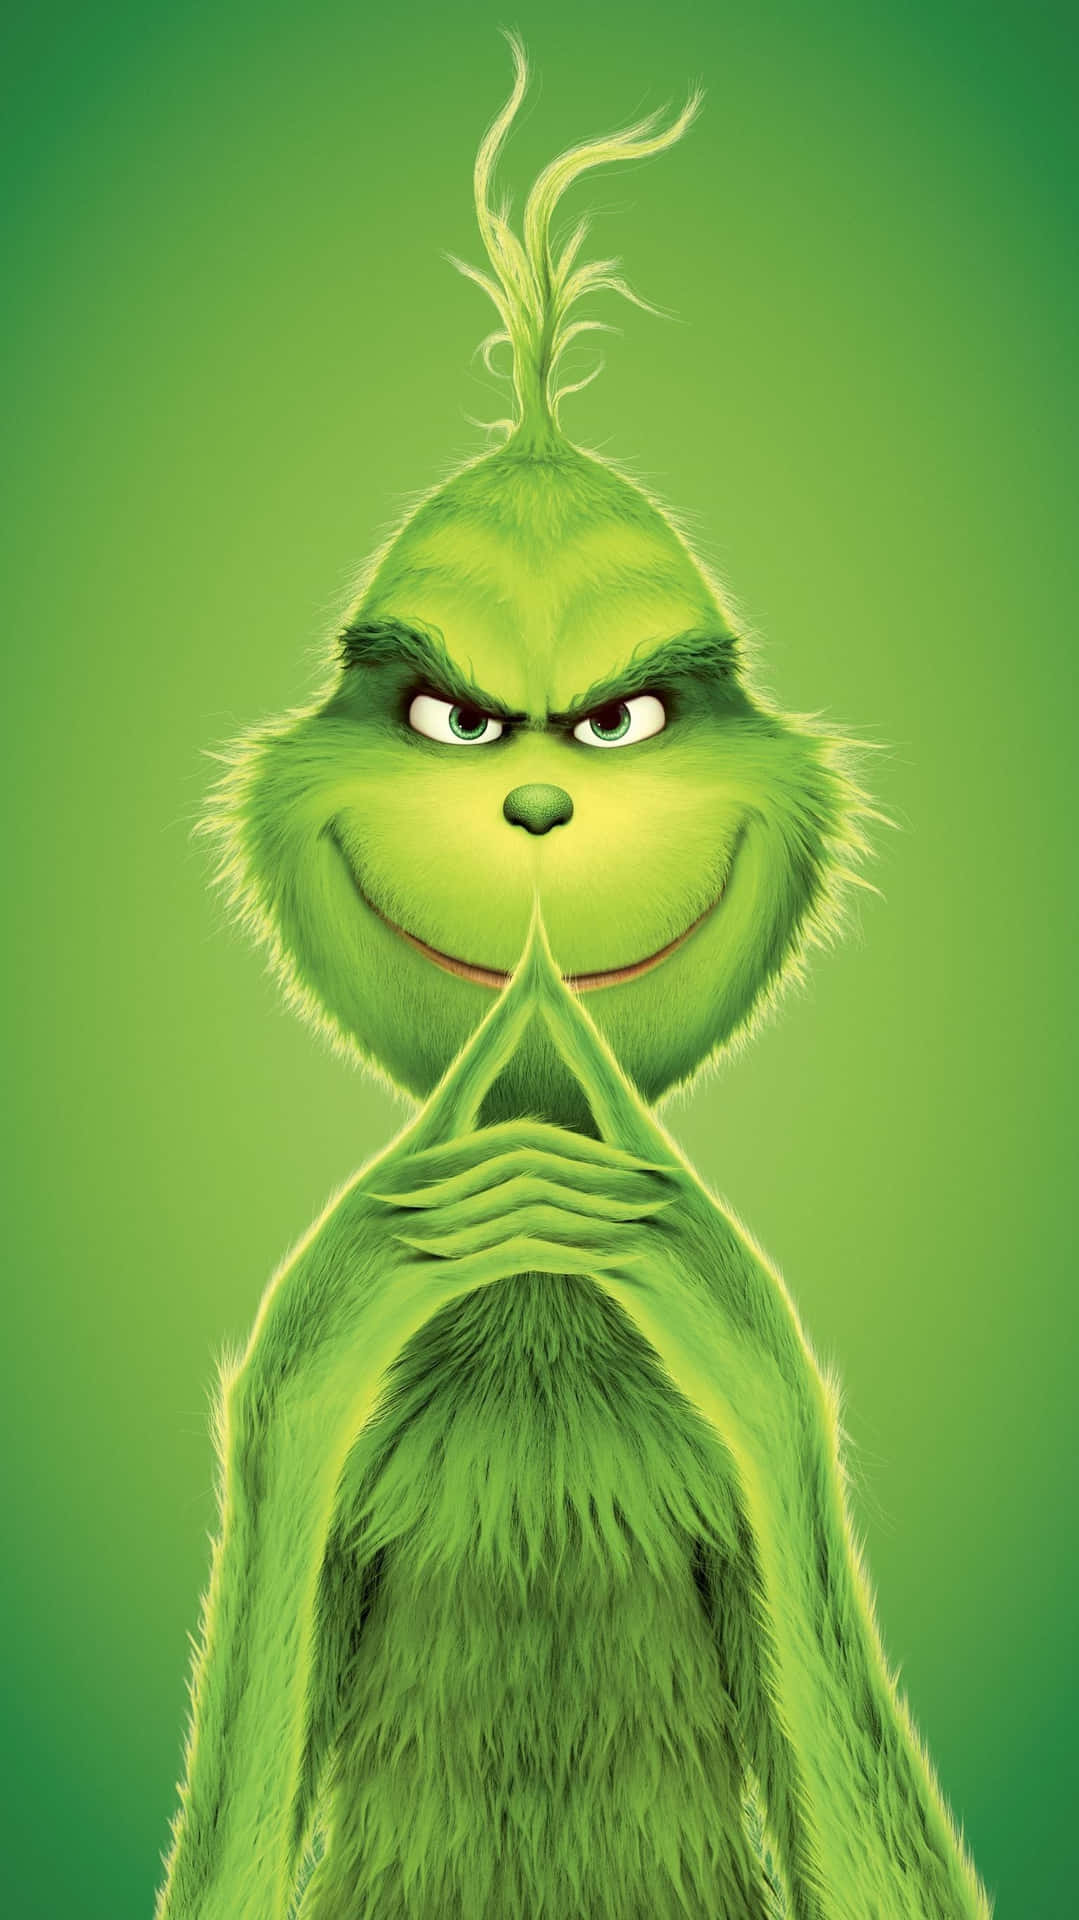 Join The Grinch In Celebrating Christmas!